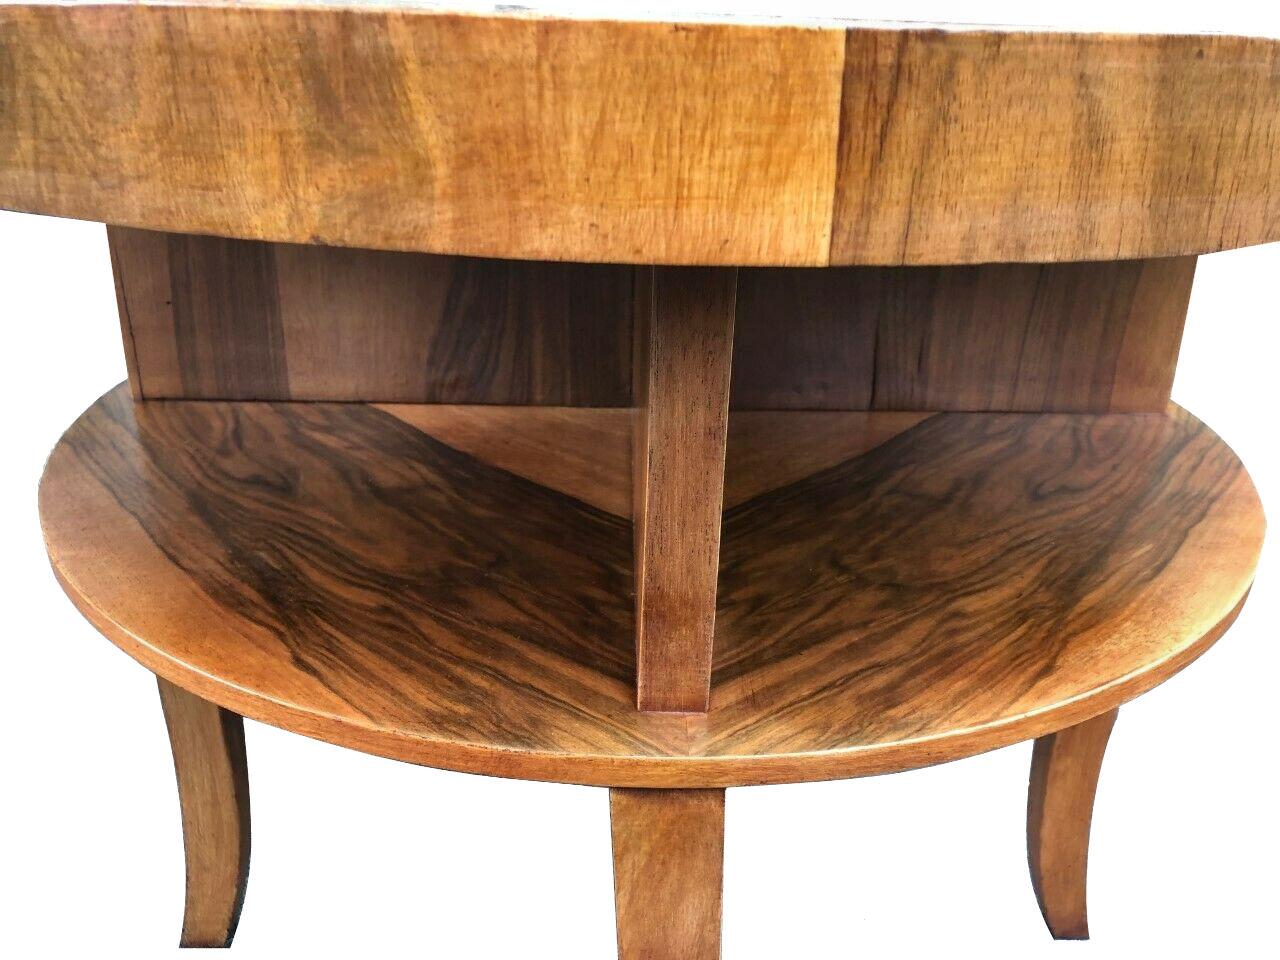 Stylish Art Deco book table in attractively patterned figured walnut veneer with a warm mid tone coloring will ensure this piece integrates easily in most settings. The quarter veneer top is particularly attractive and the under tier quadrant